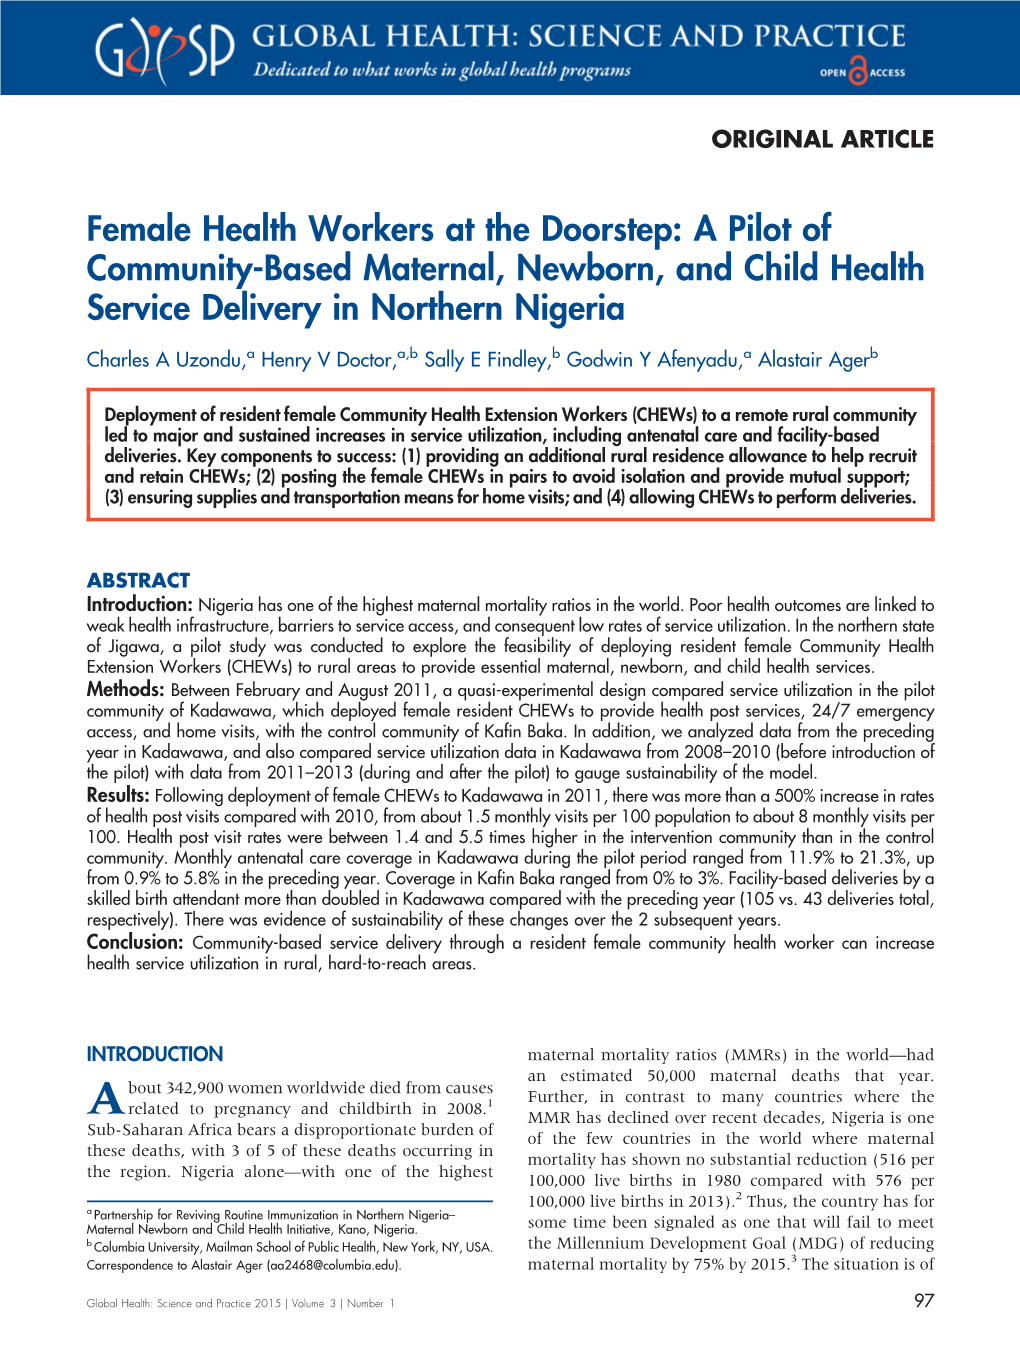 Female Health Workers at the Doorstep: a Pilot of Community-Based Maternal, Newborn, and Child Health Service Delivery in Northern Nigeria